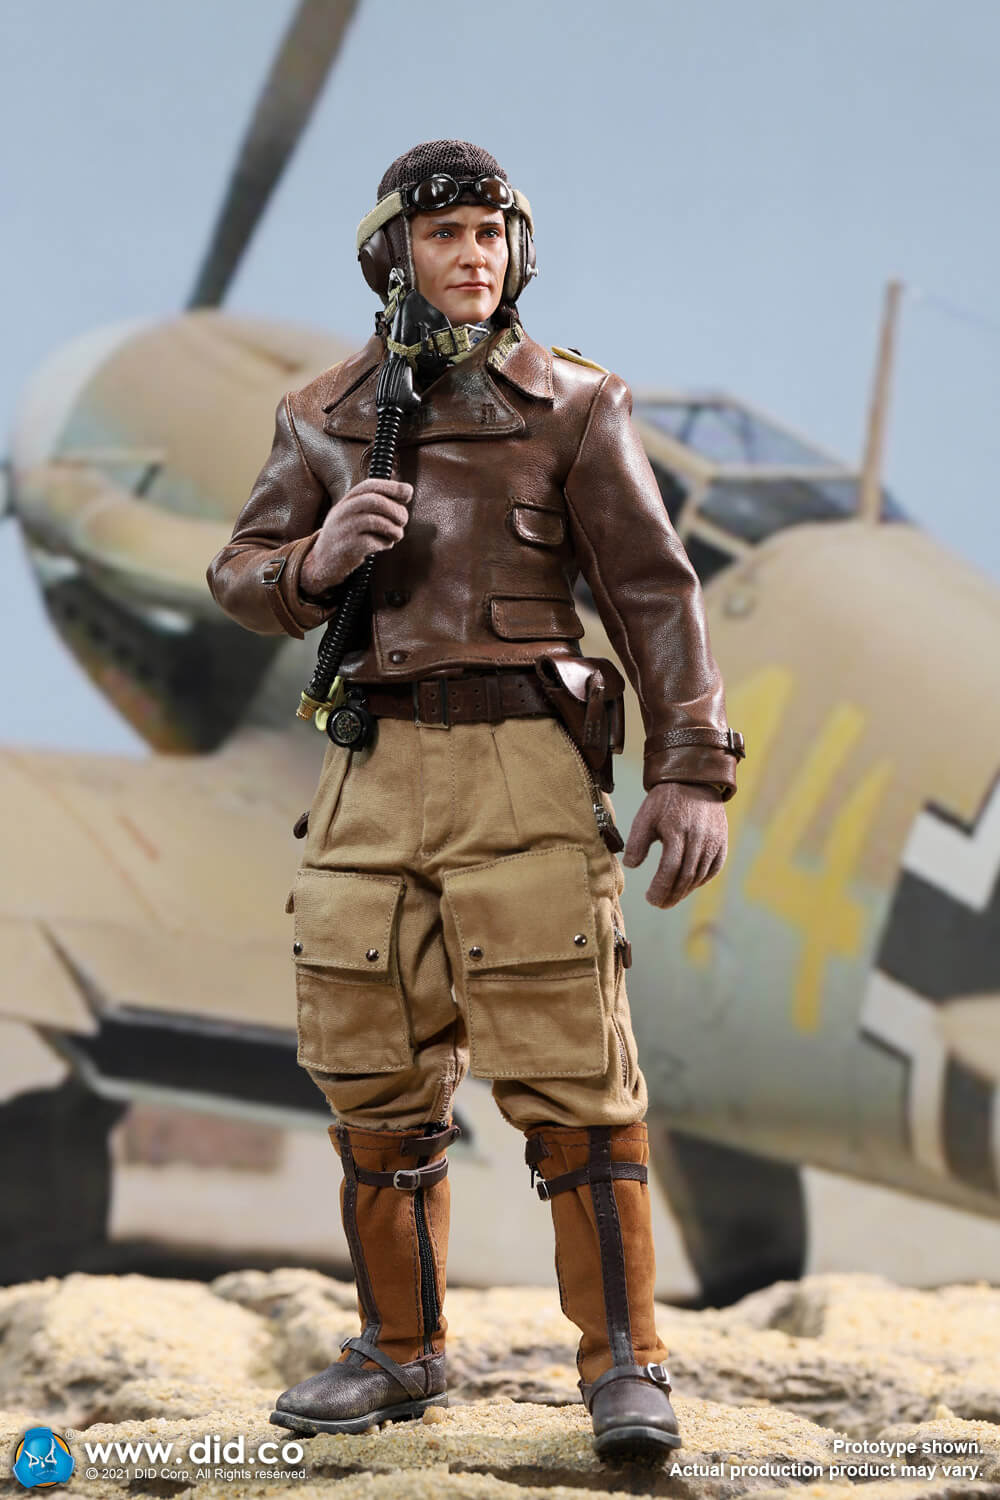 historical - NEW PRODUCT: D80154 WWII German Luftwaffe Flying Ace “Star Of Africa” – Hans-Joachim Marseille & E60060  Diorama Of “Star Of Africa” 11575